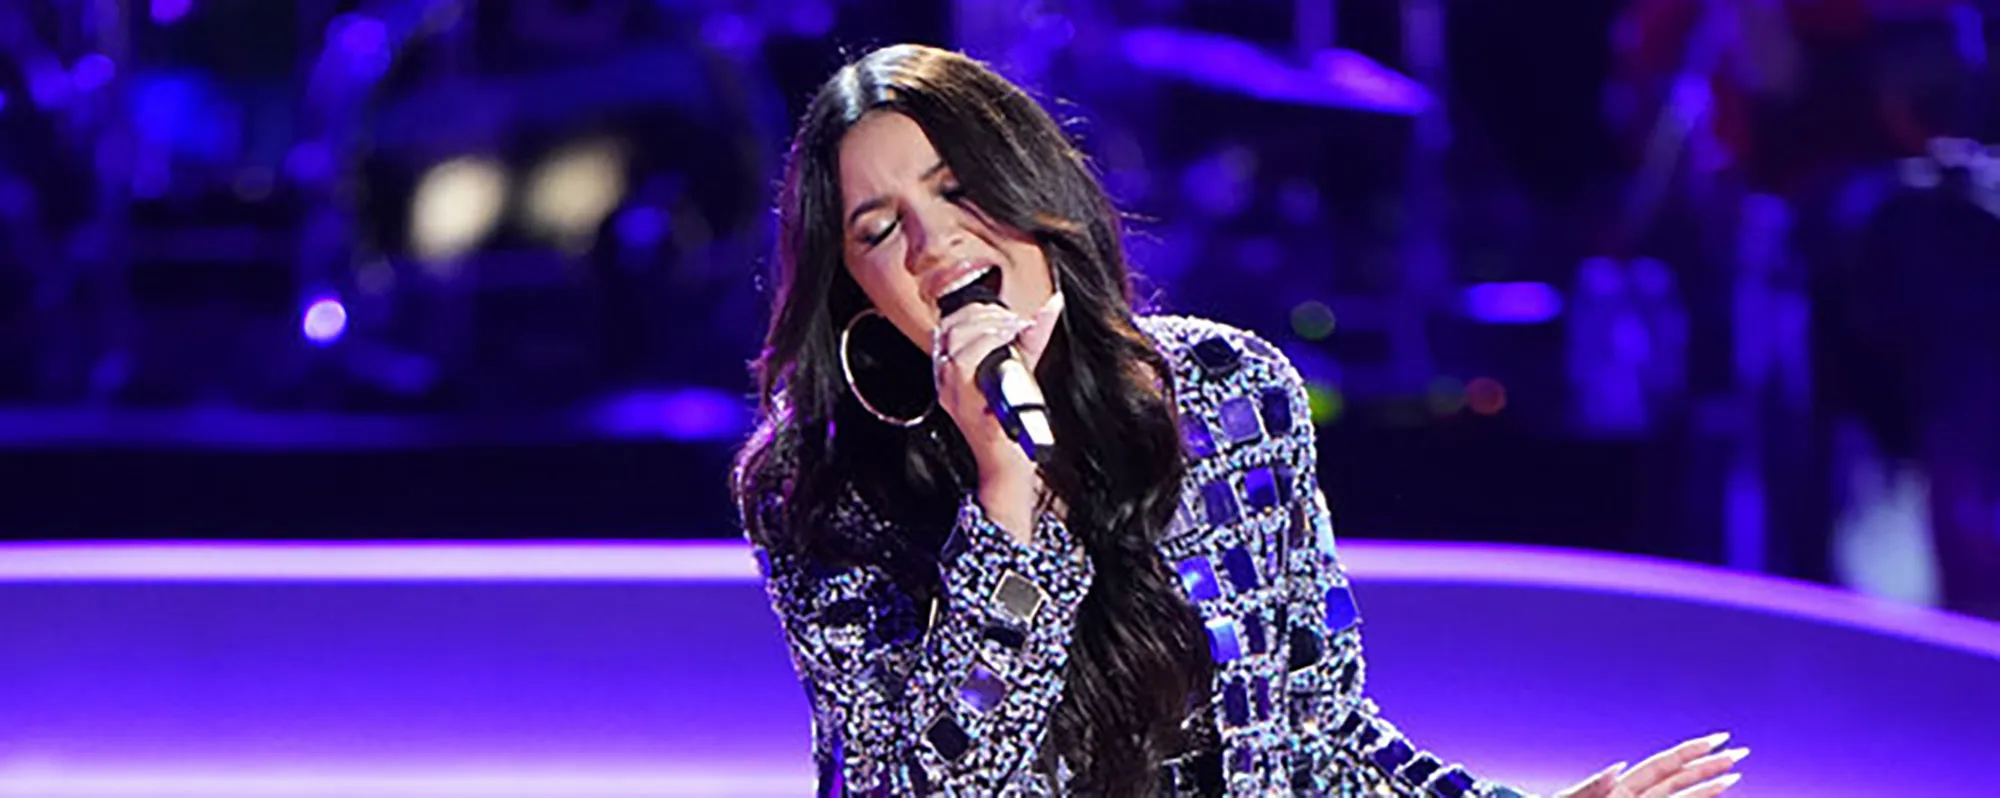 Singer Rudi Earns Four Chair Turn on 'The Voice' - American Songwriter